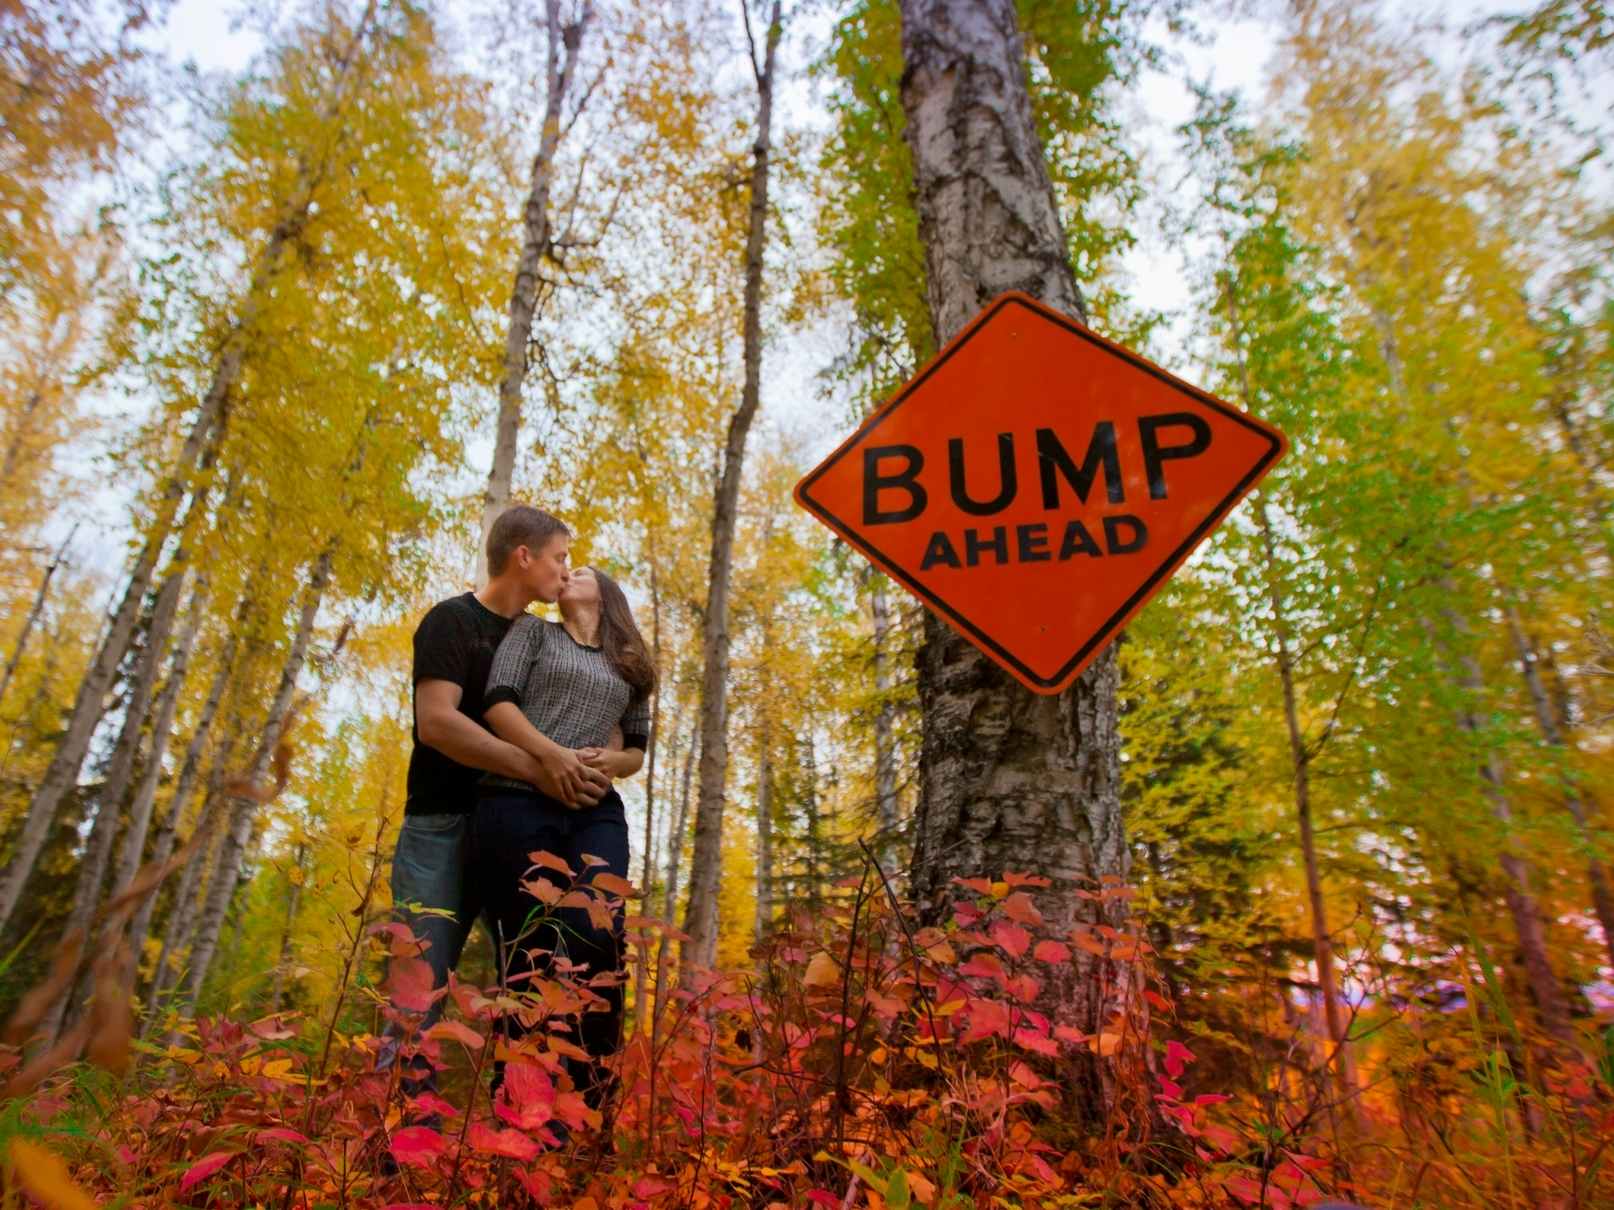 A couple kissing in some woods with a sign that reads "Bump Ahead" in front of them.